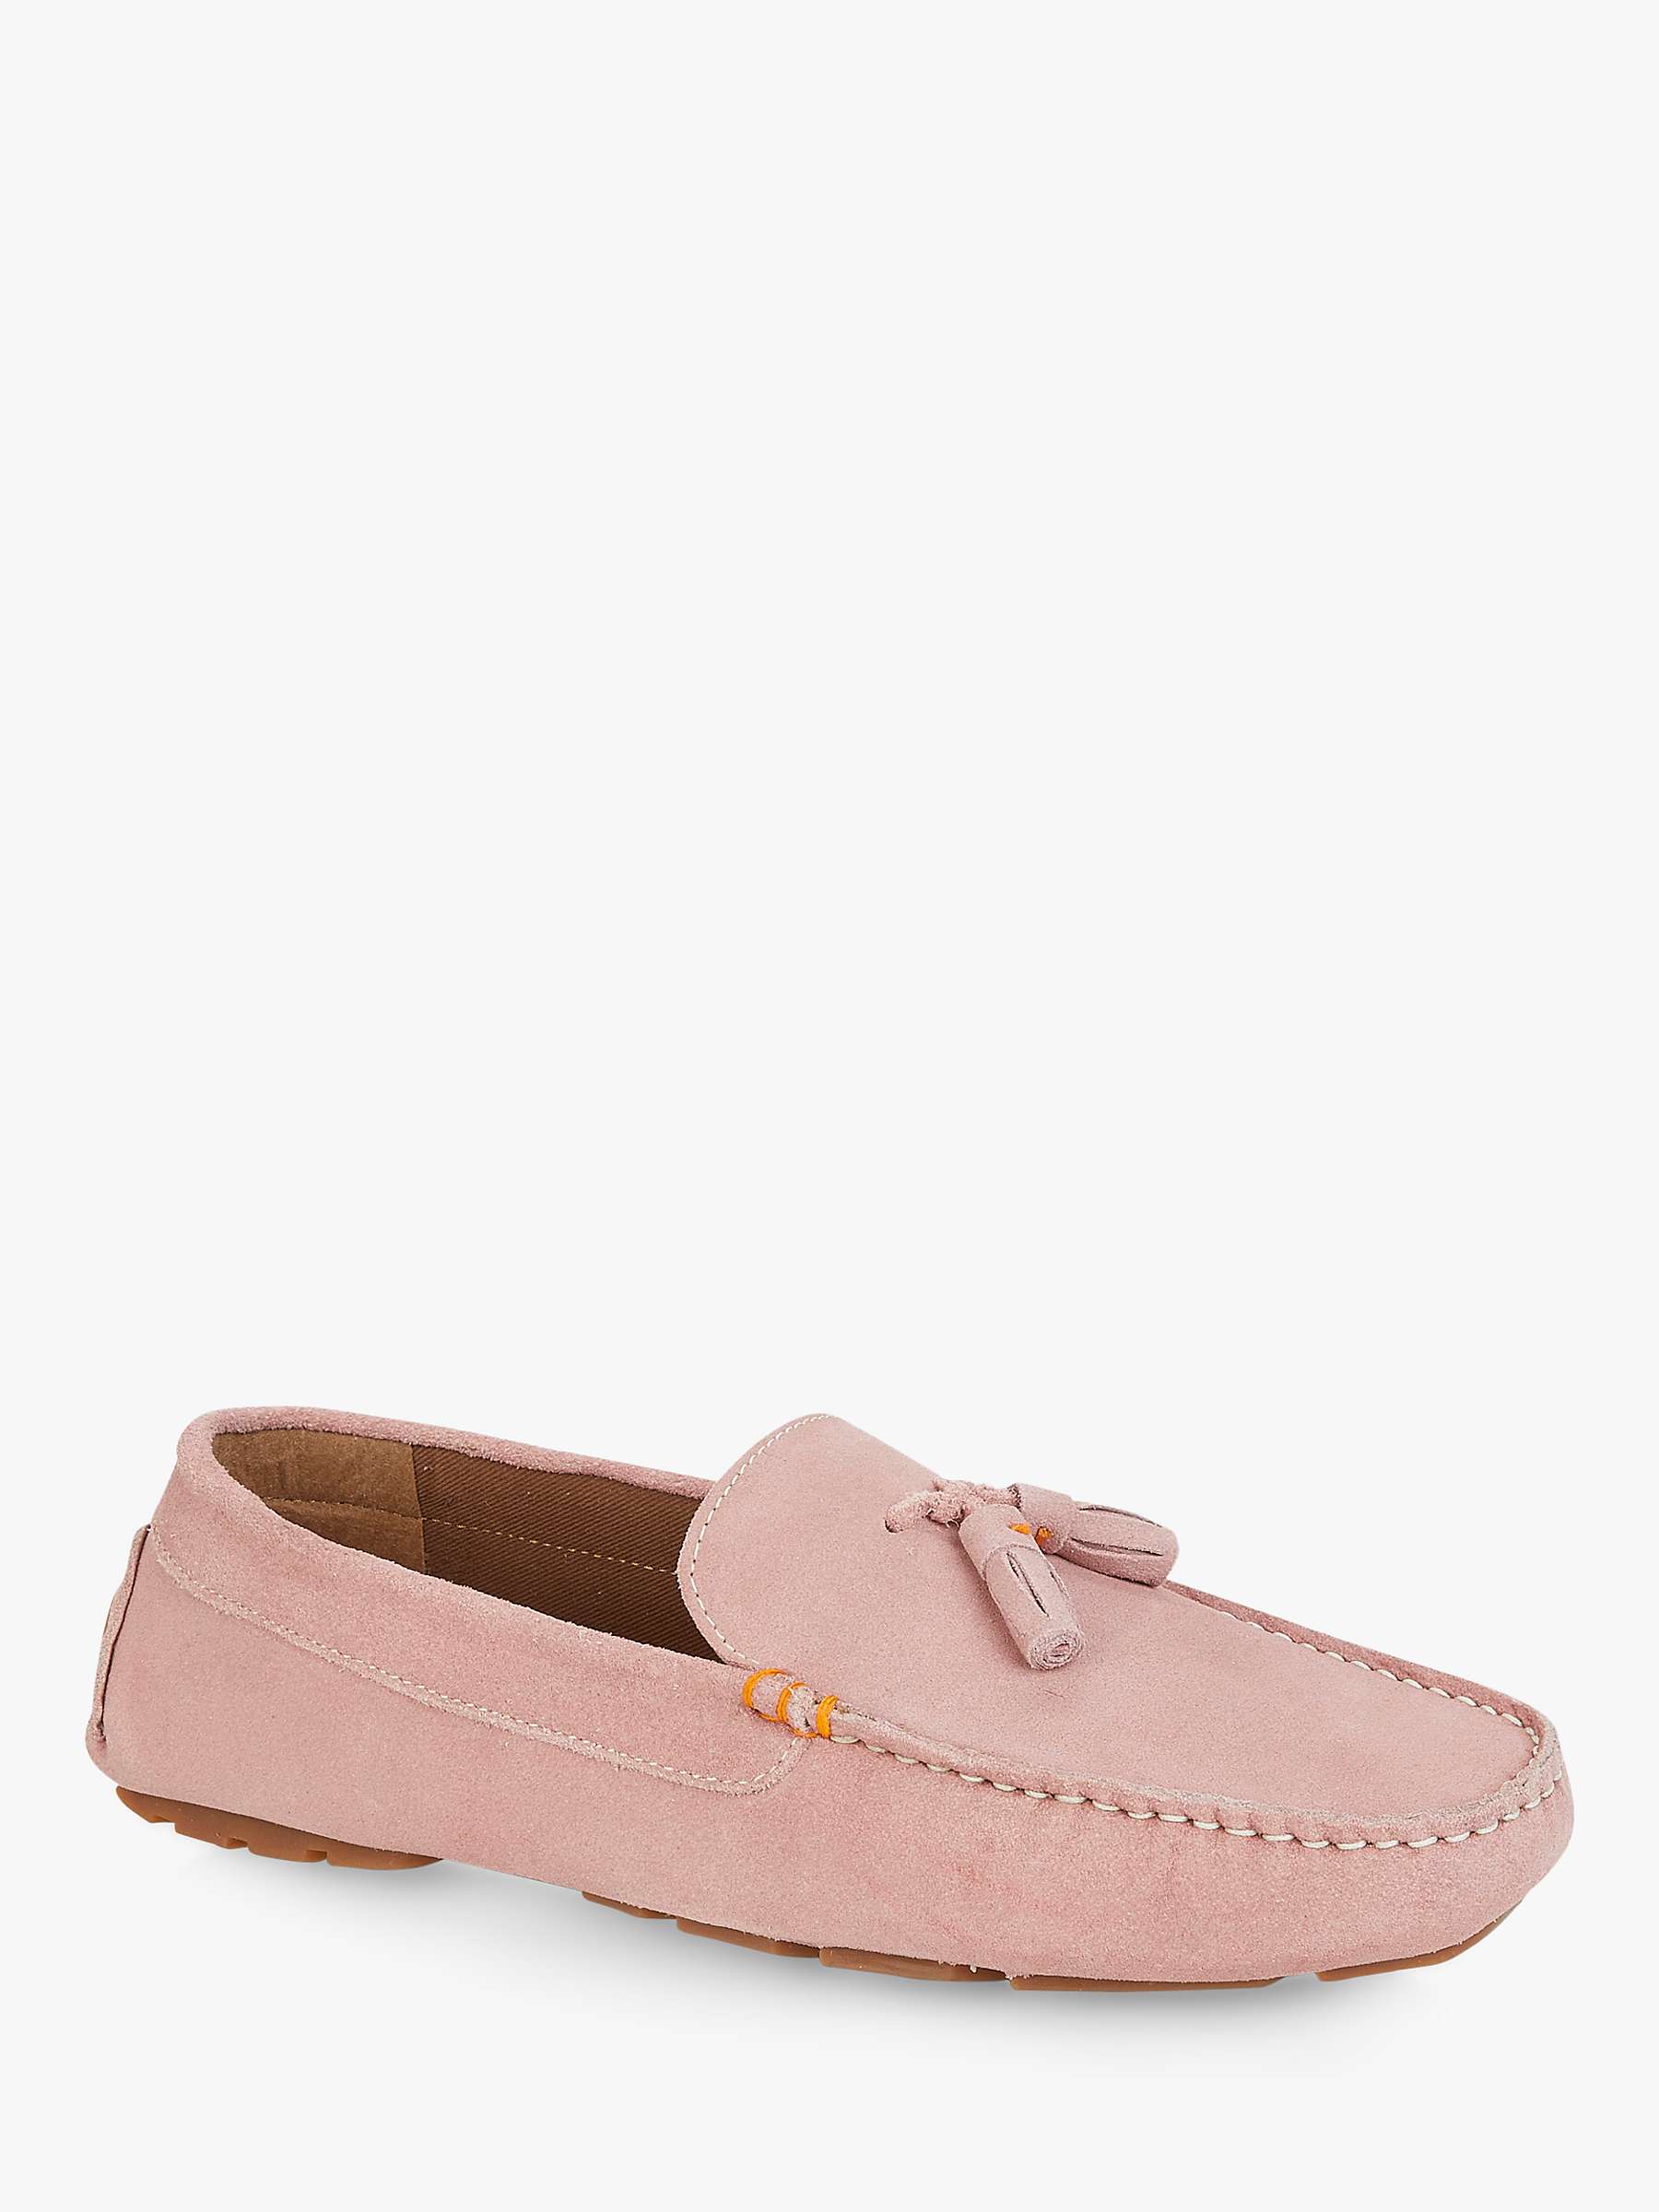 Buy Silver Street London Jackson Suede Loafers Online at johnlewis.com